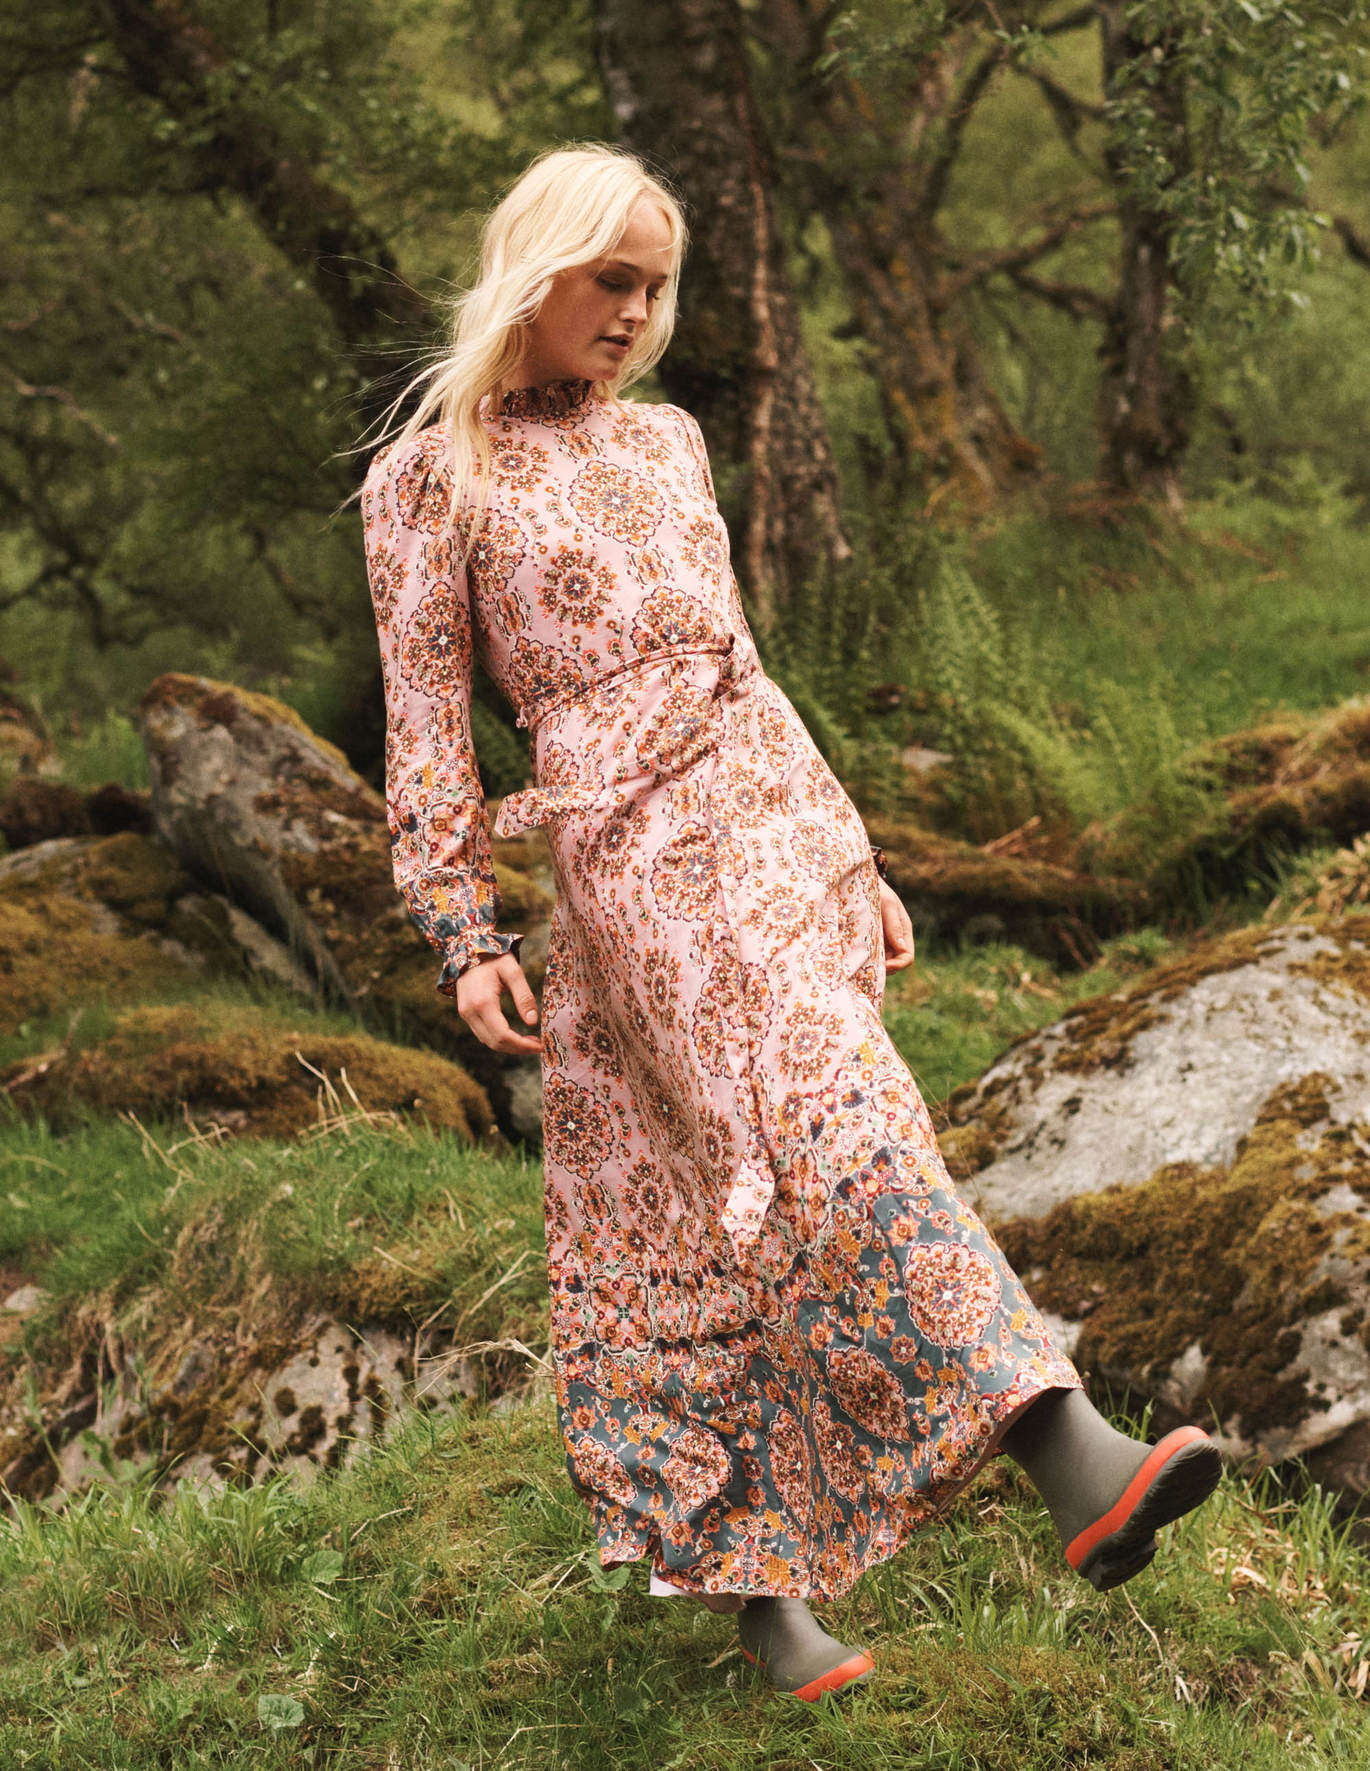 Boden Releases 30th Anniversary Collection Featuring Recycled Materials